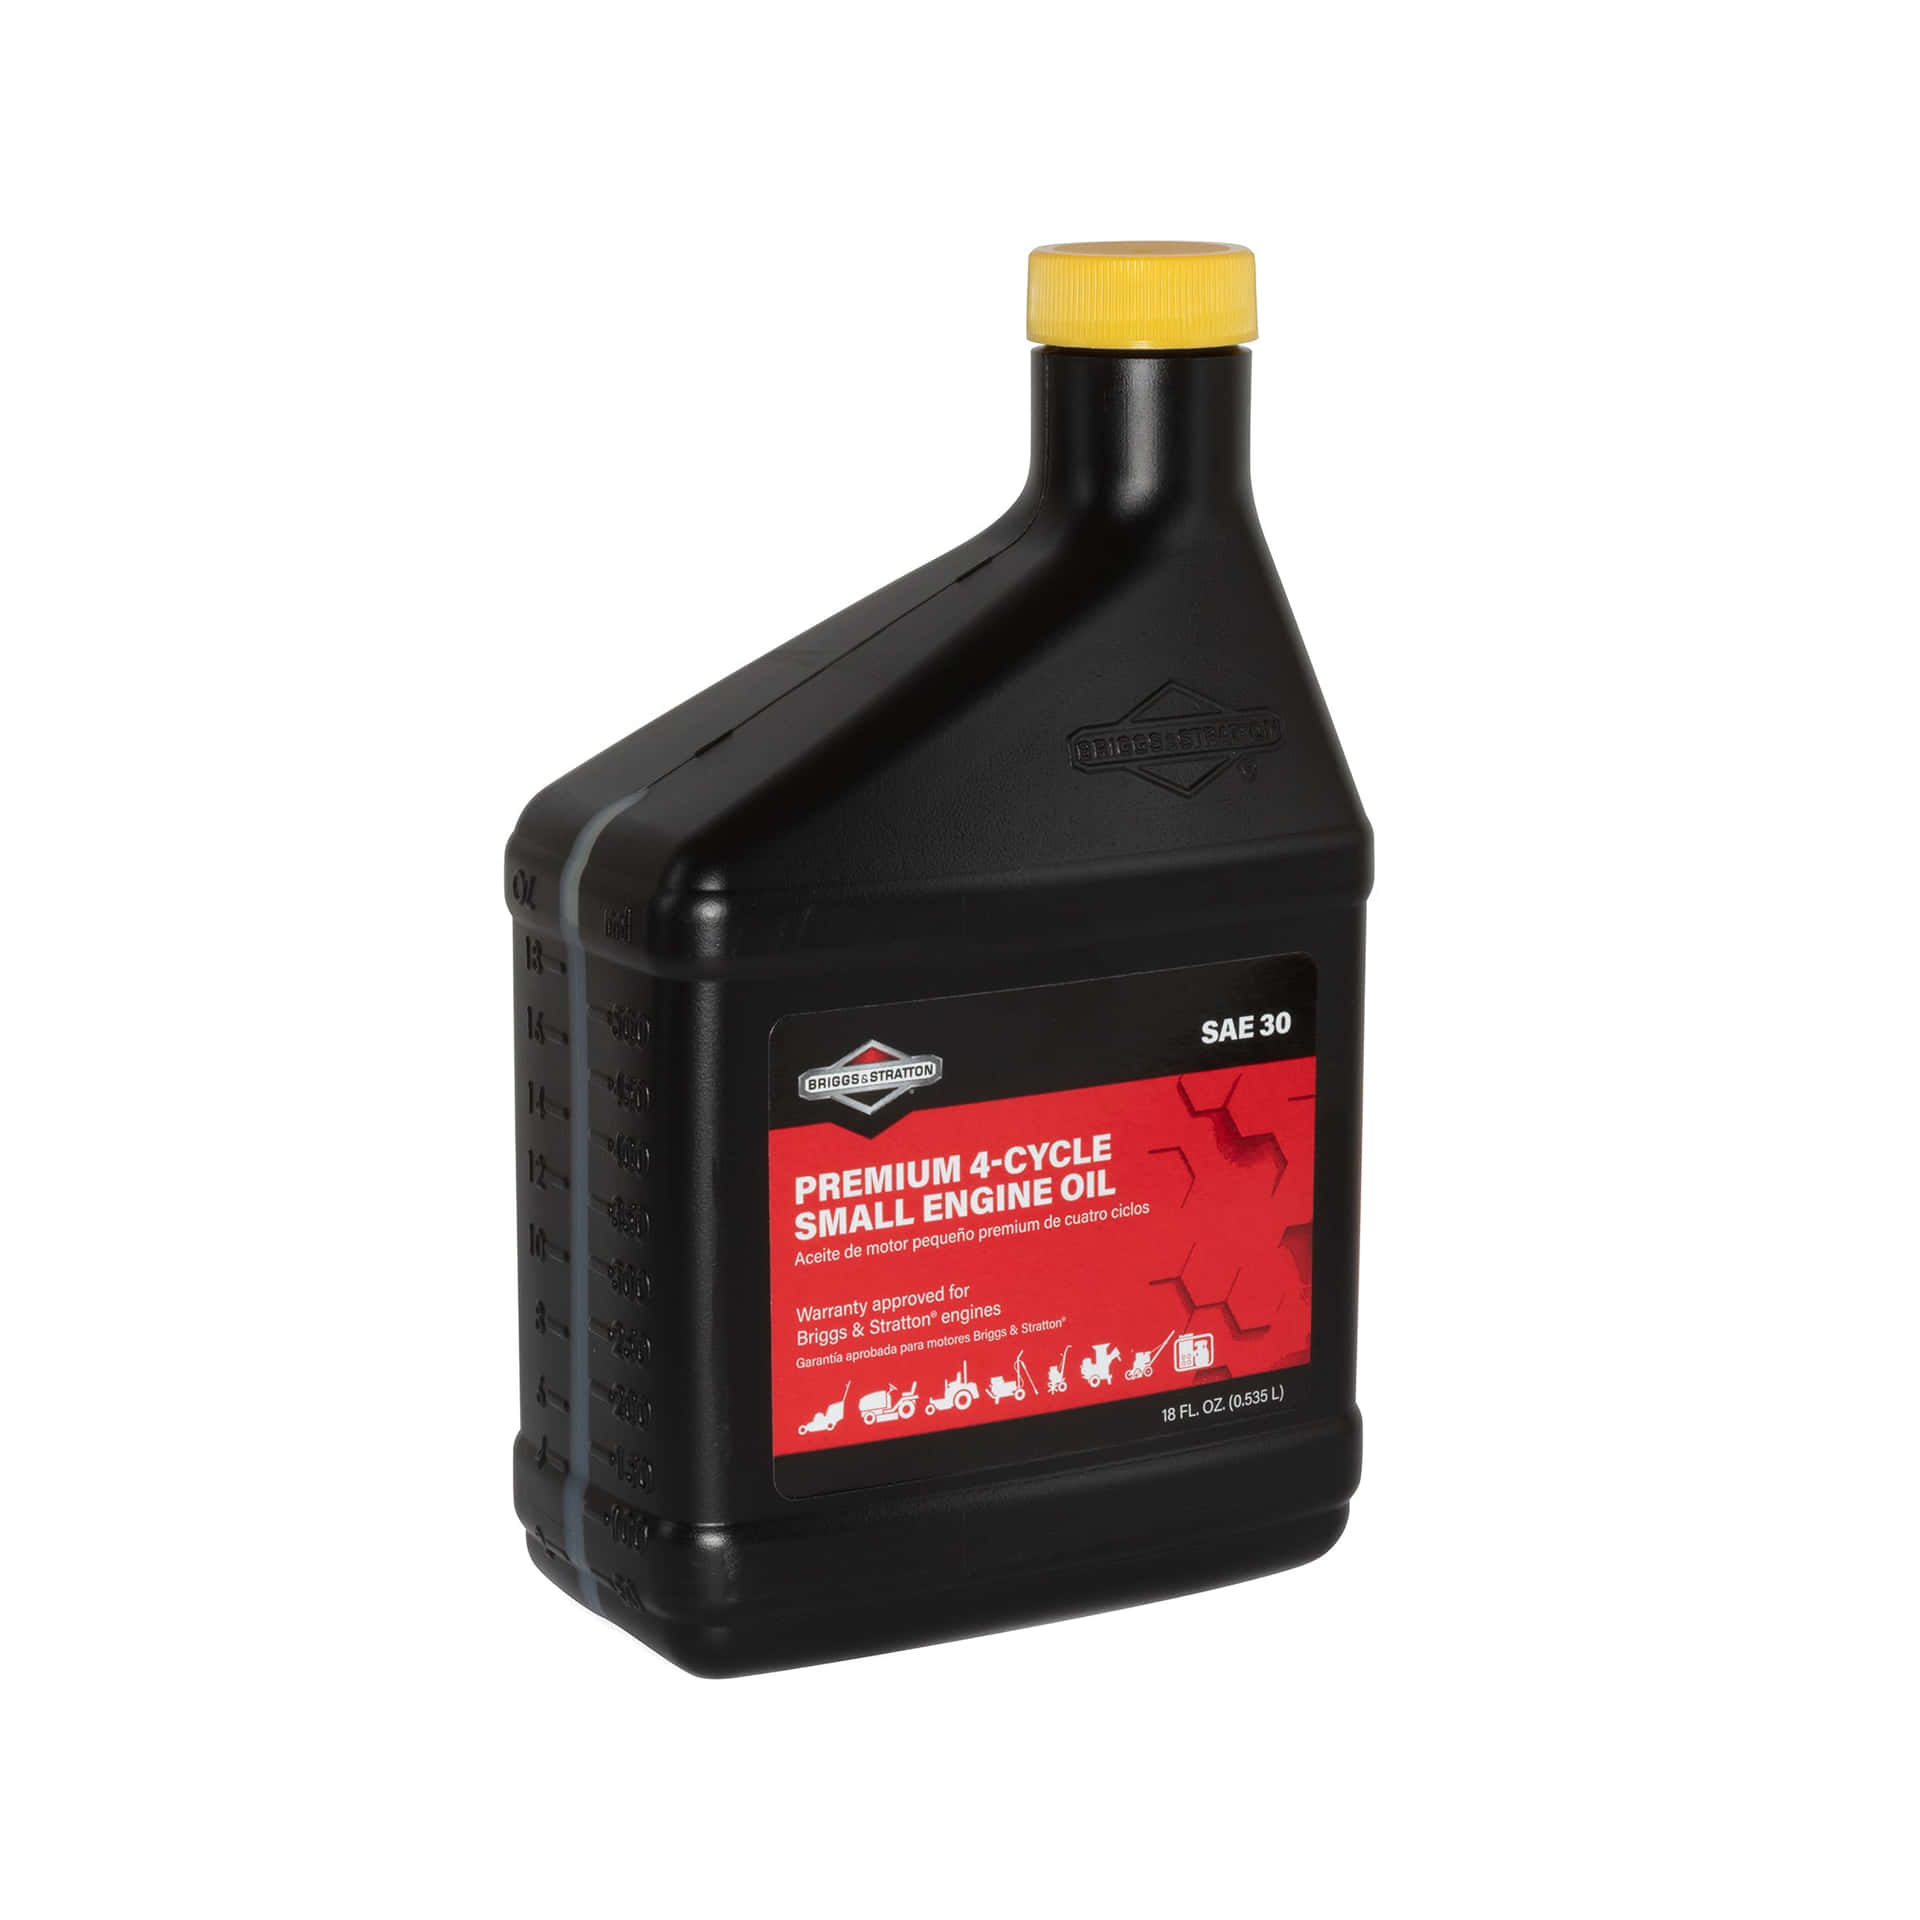 Keep your engine running smoothly with quality engine oil.